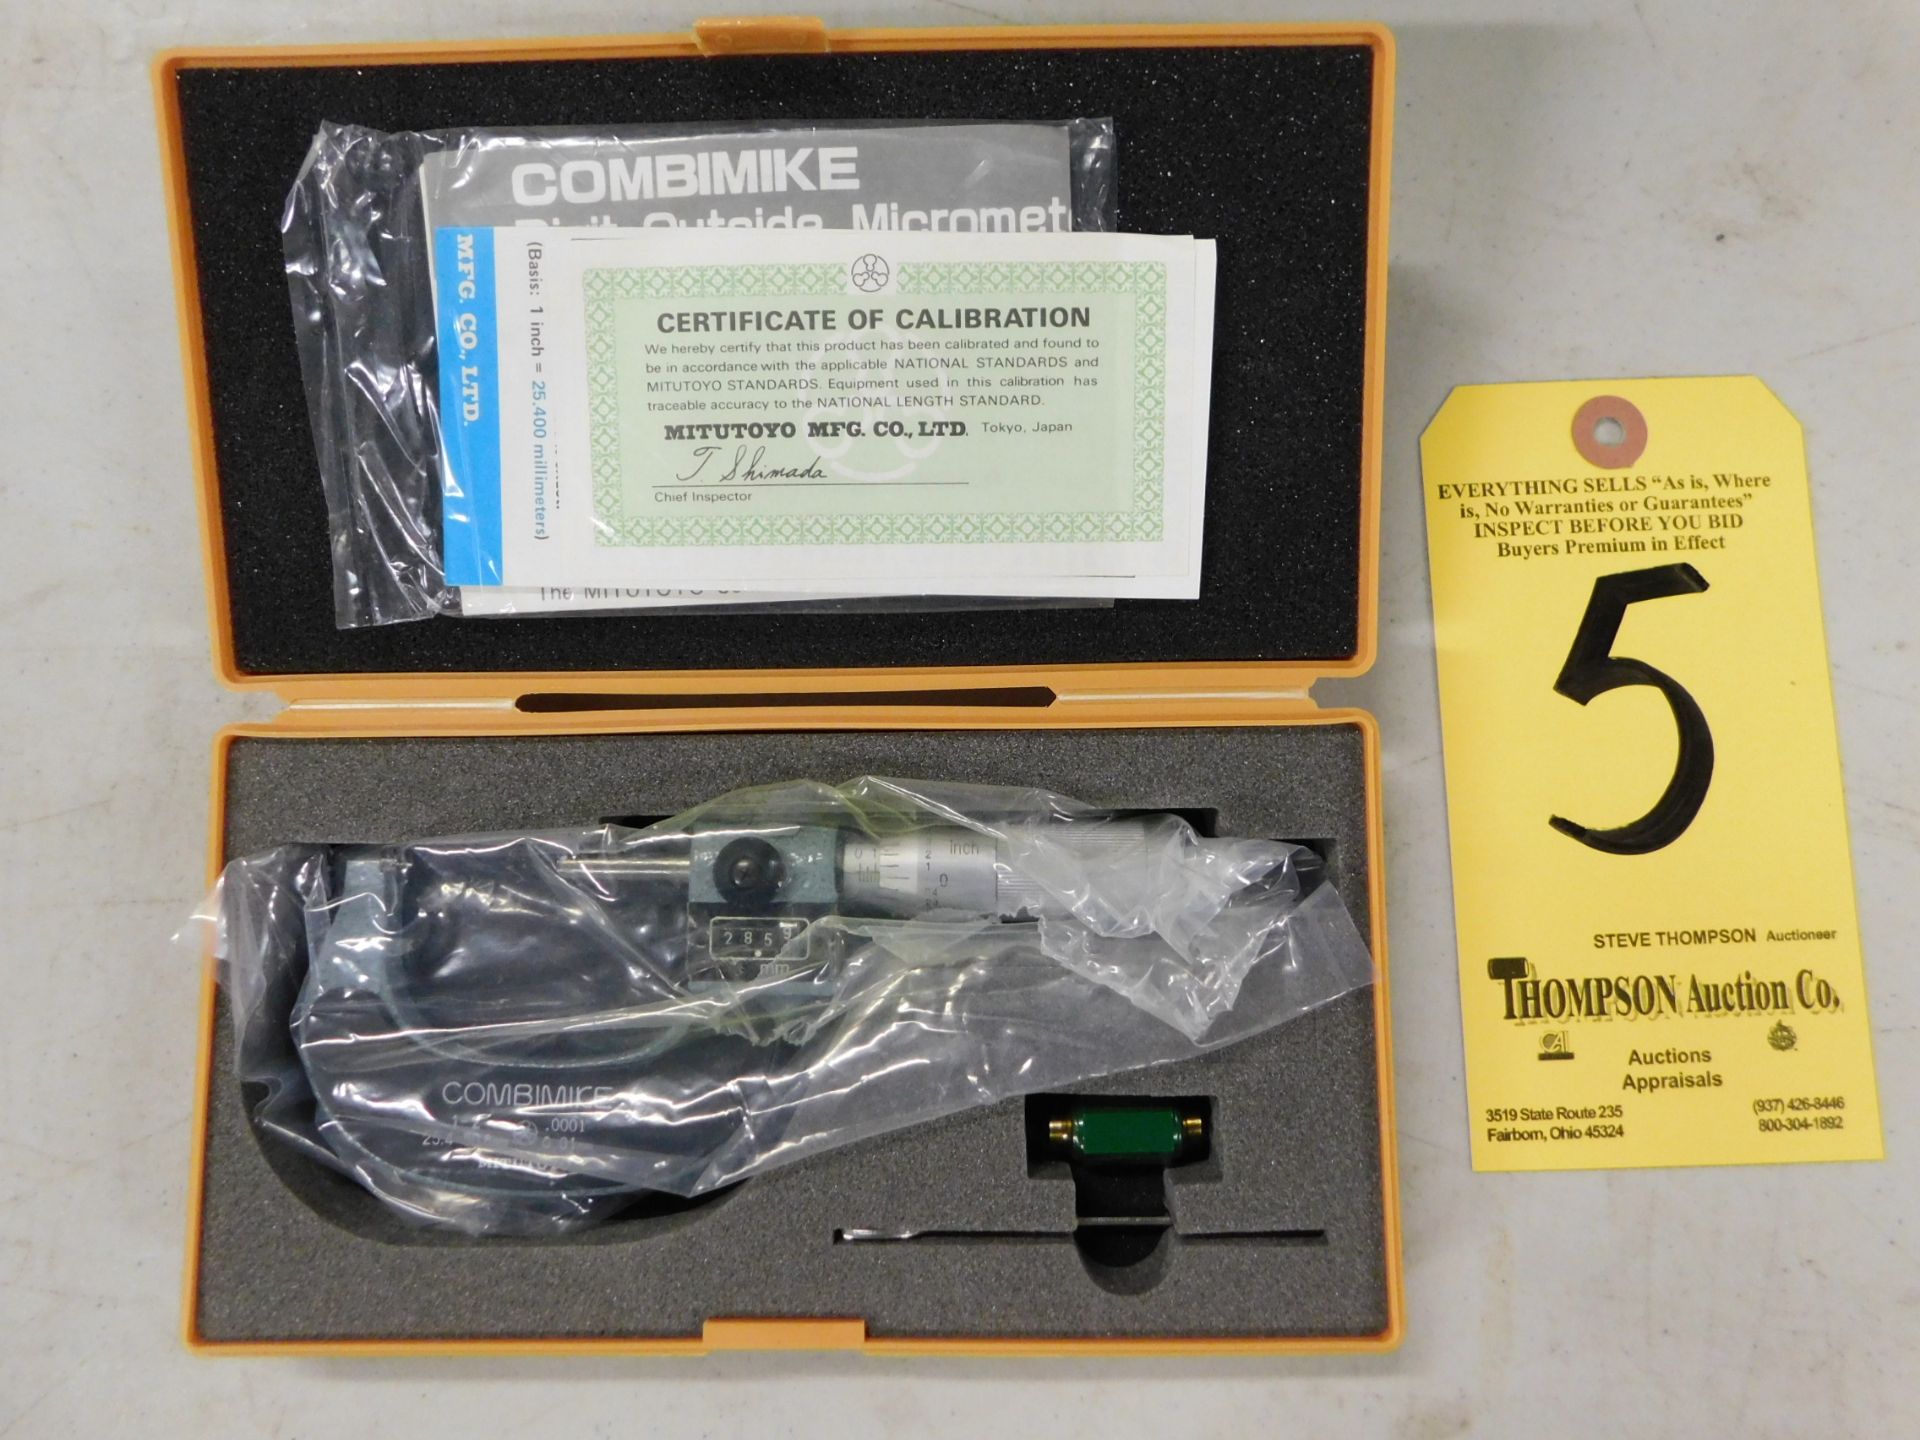 Mitutoyo Combimike Digital Outside Micrometer #159-212, 1-2", 0001" Resolution, New